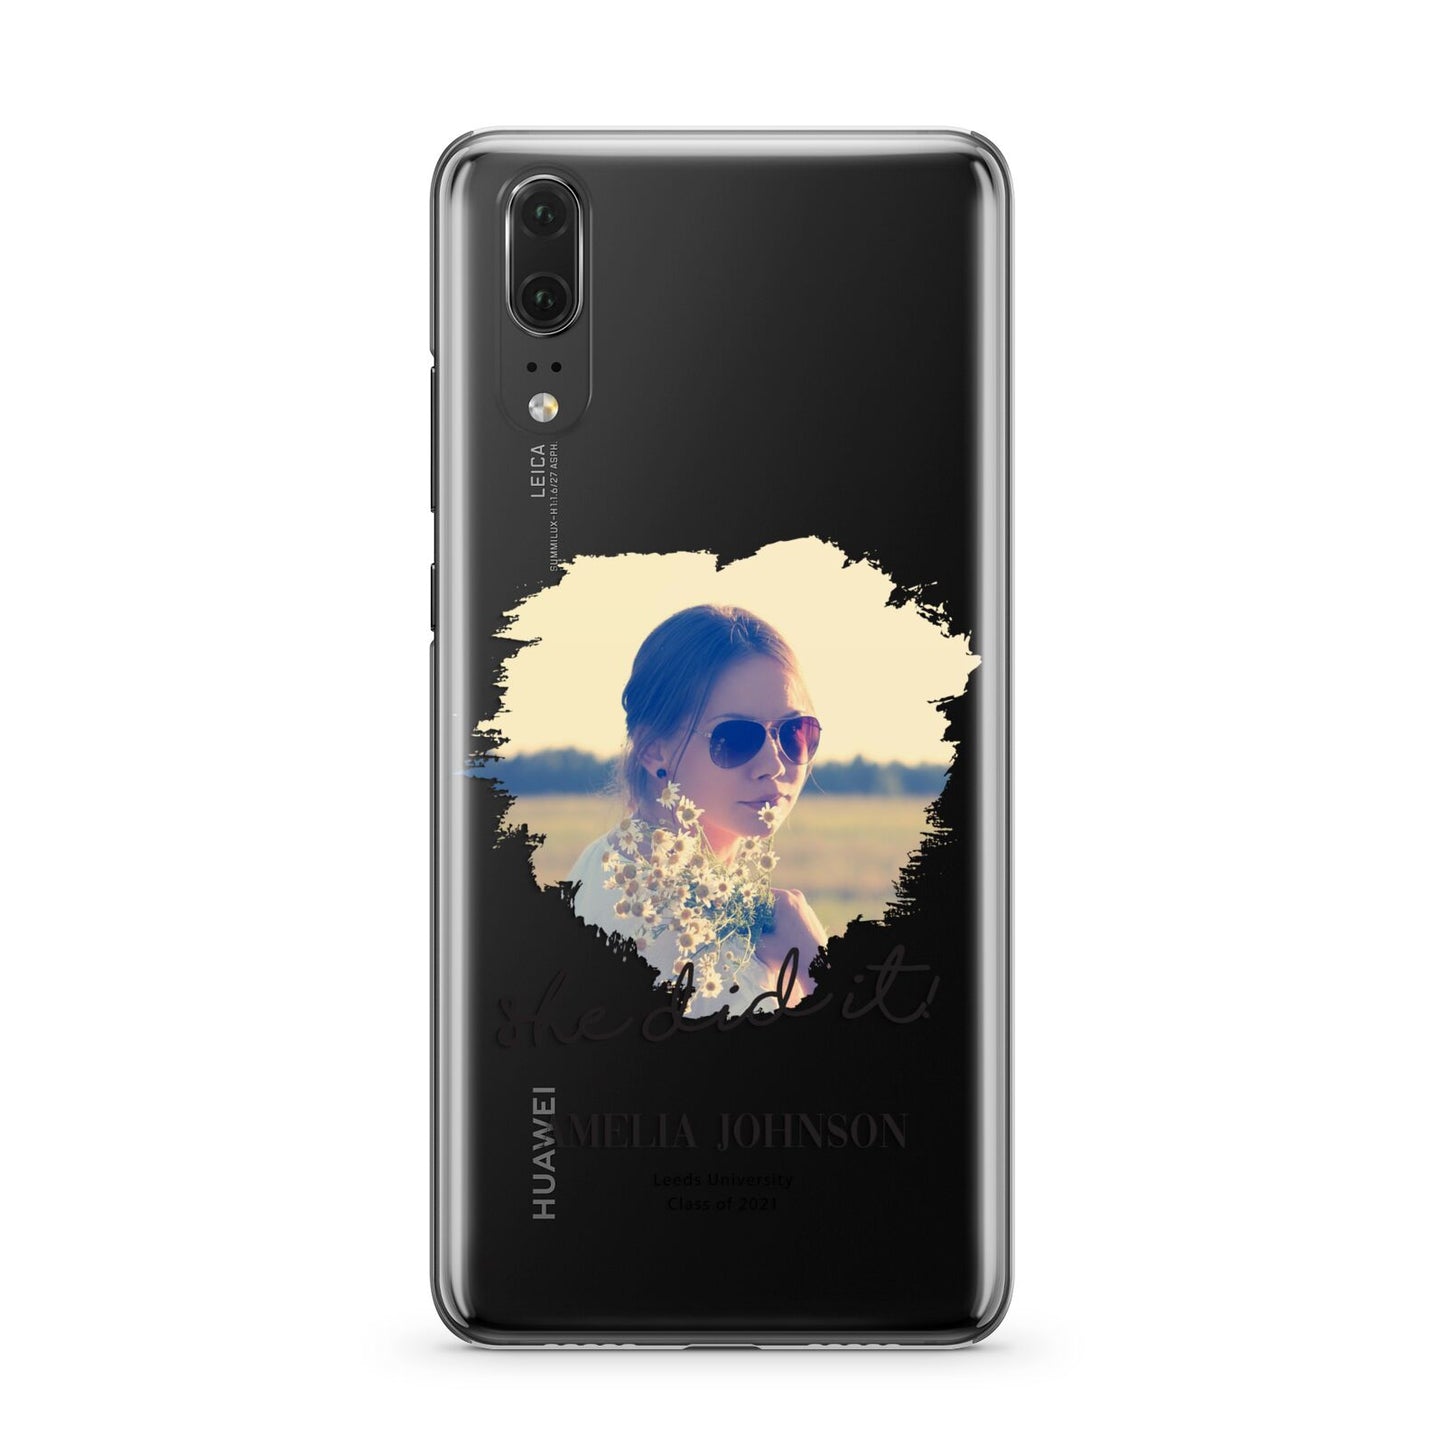 She Did It Graduation Photo with Name Huawei P20 Phone Case